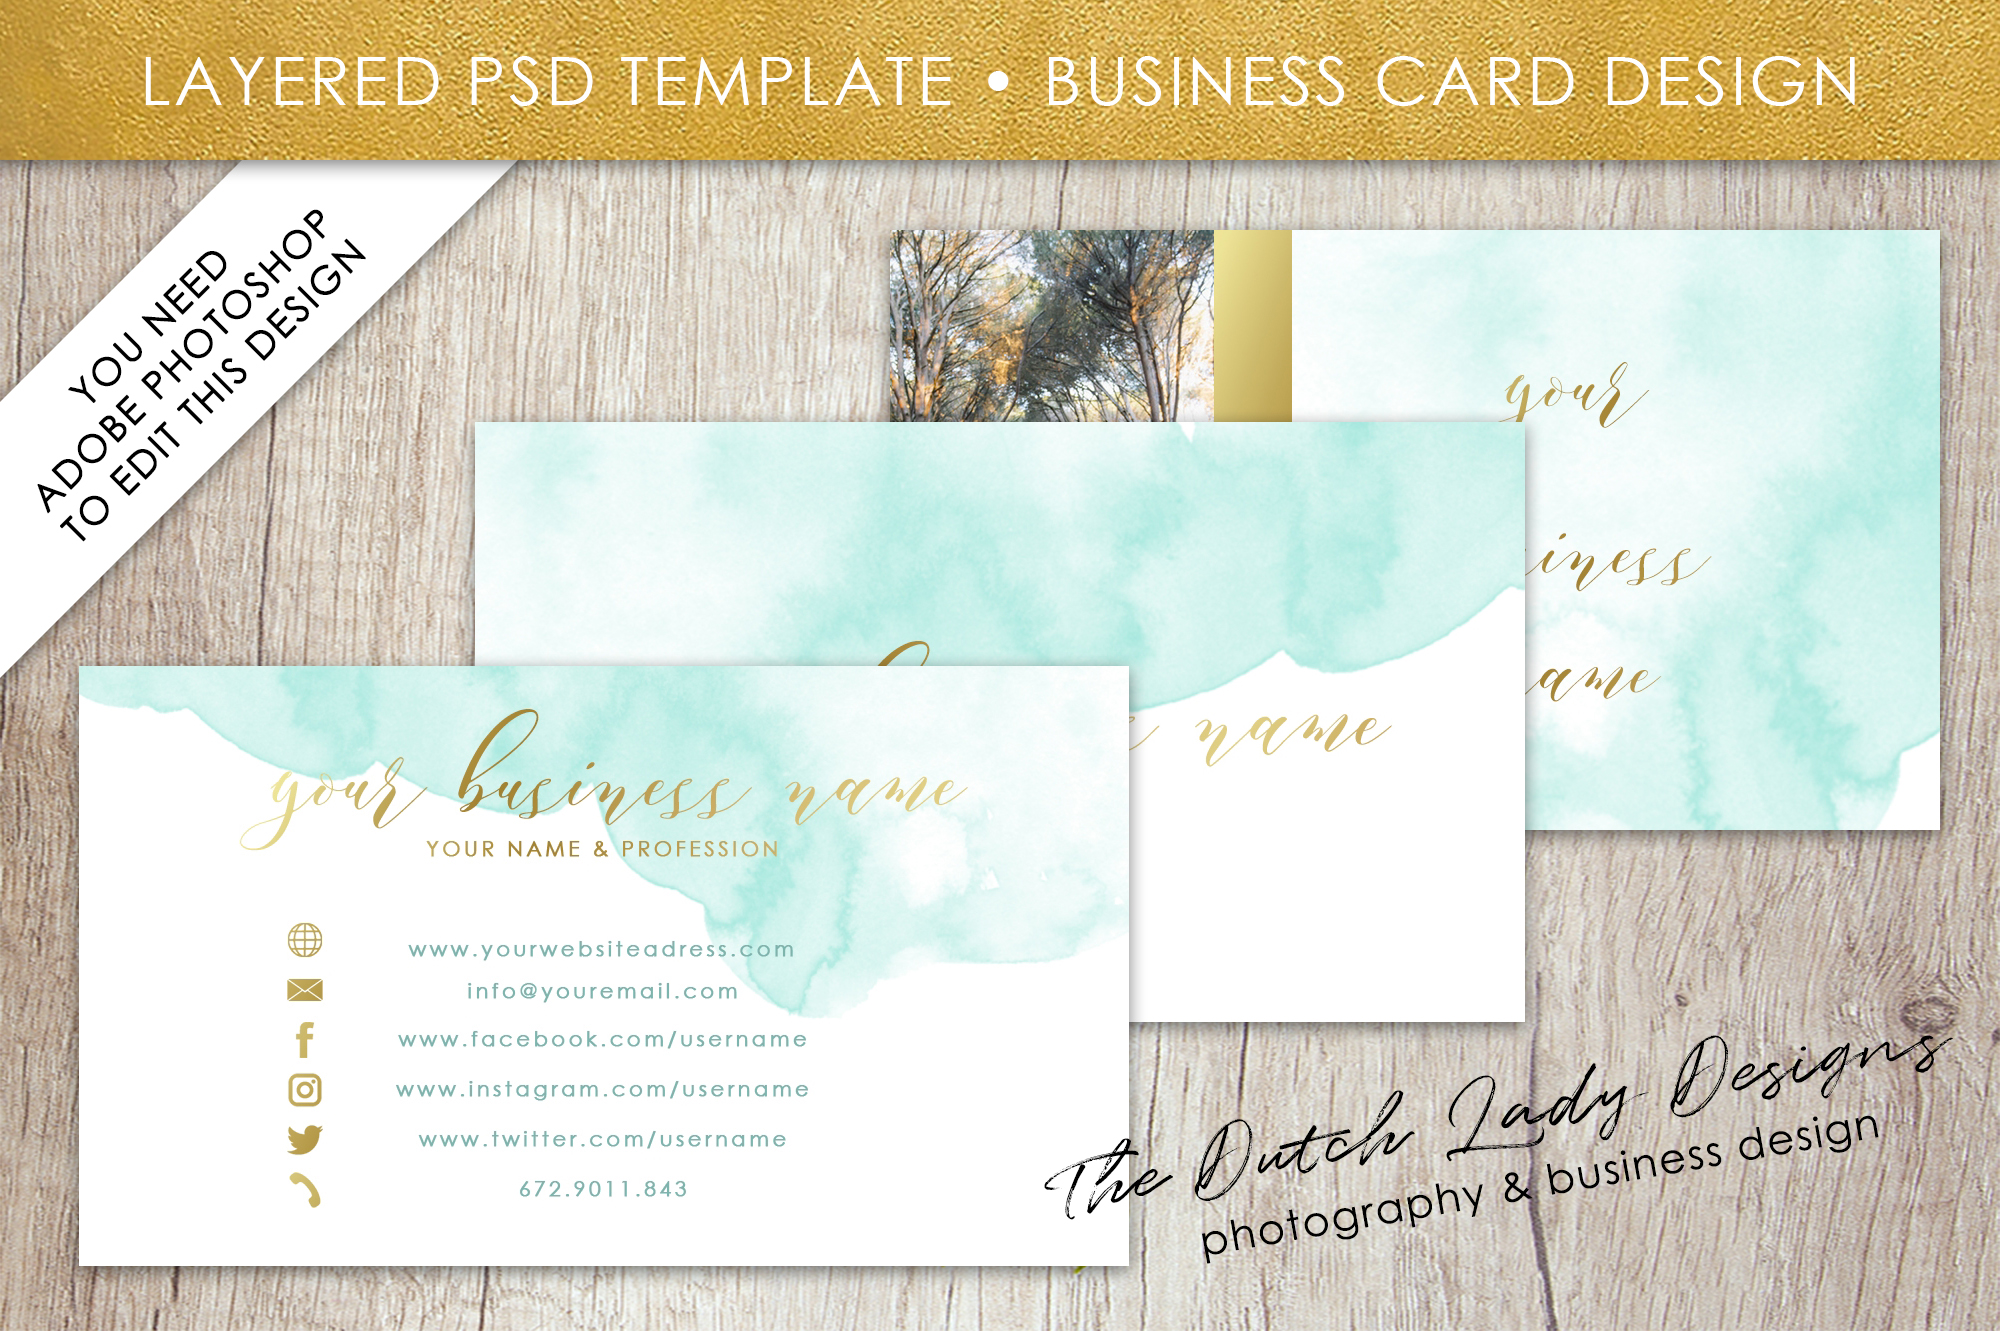 adobe photoshop business card templates free download